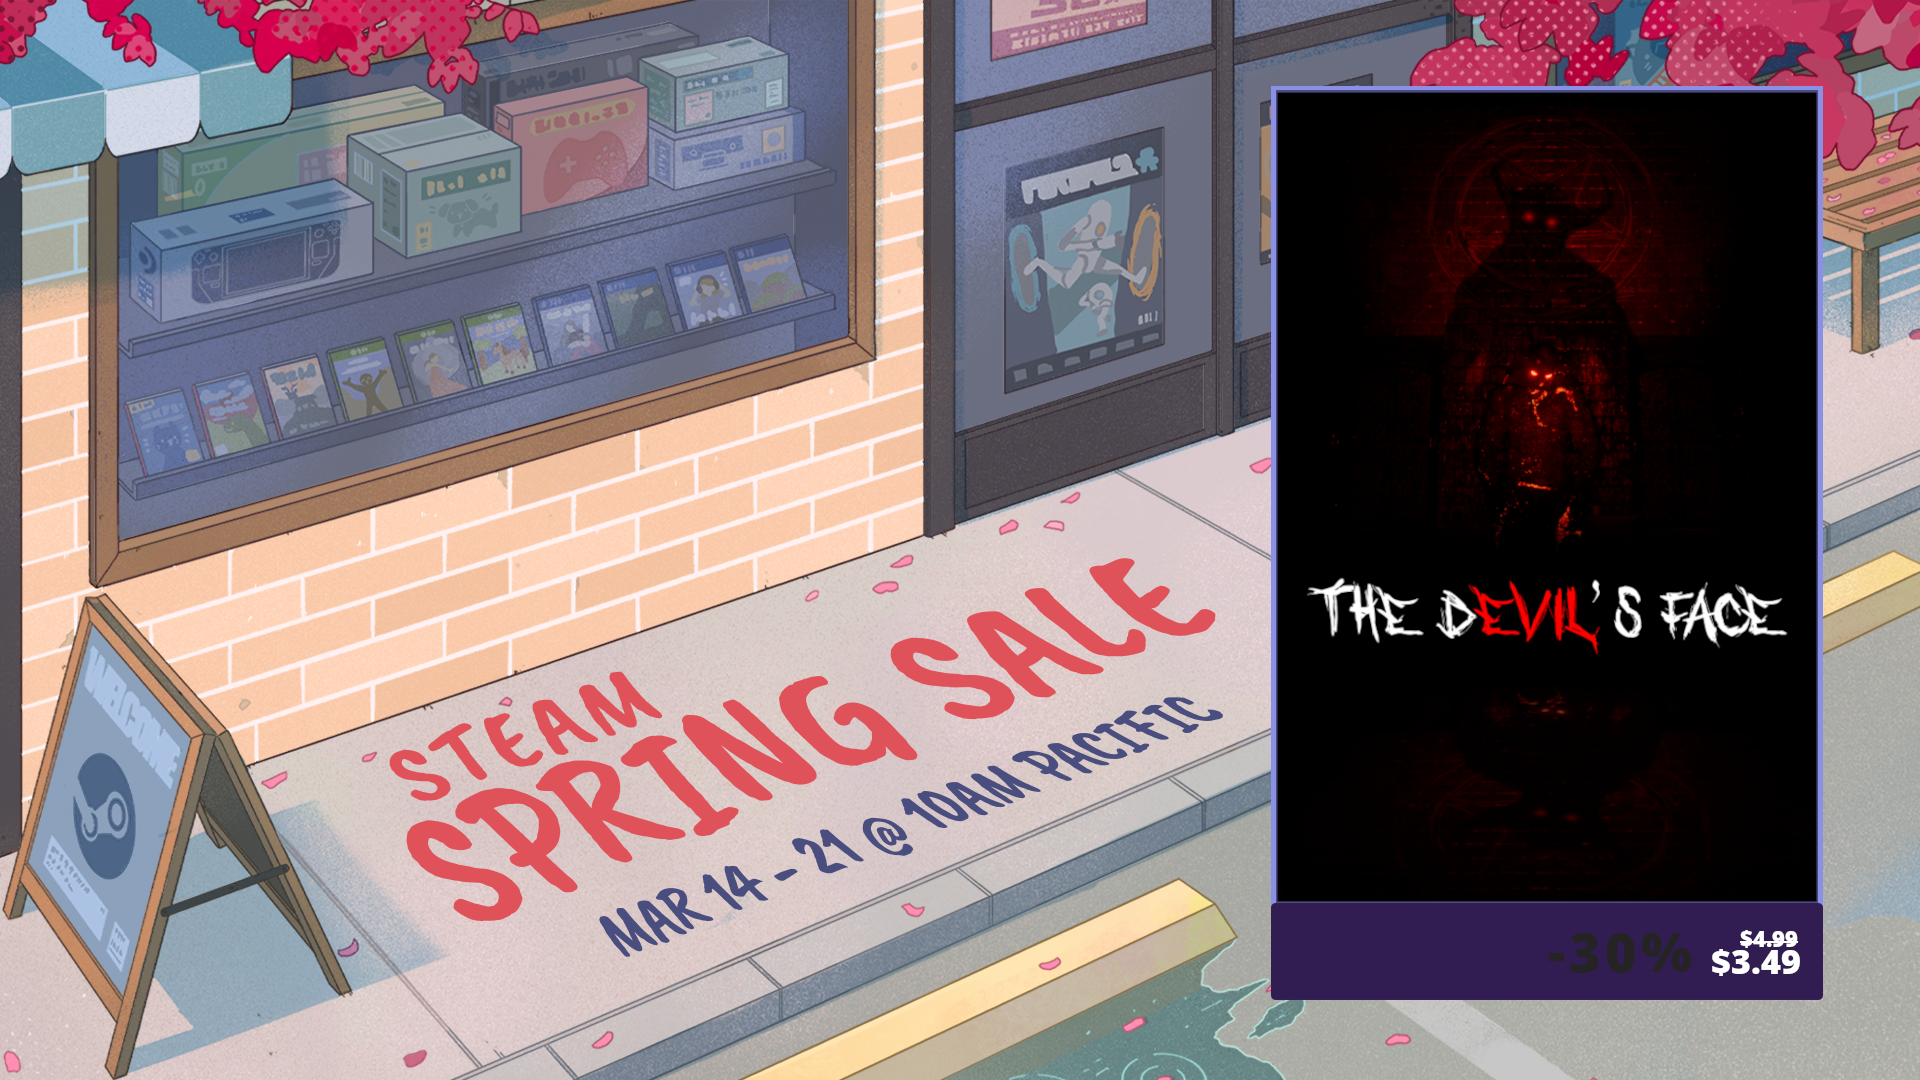 Banish the Winter Blues with Terror! The Devil’s Face Spring Sale is Here!